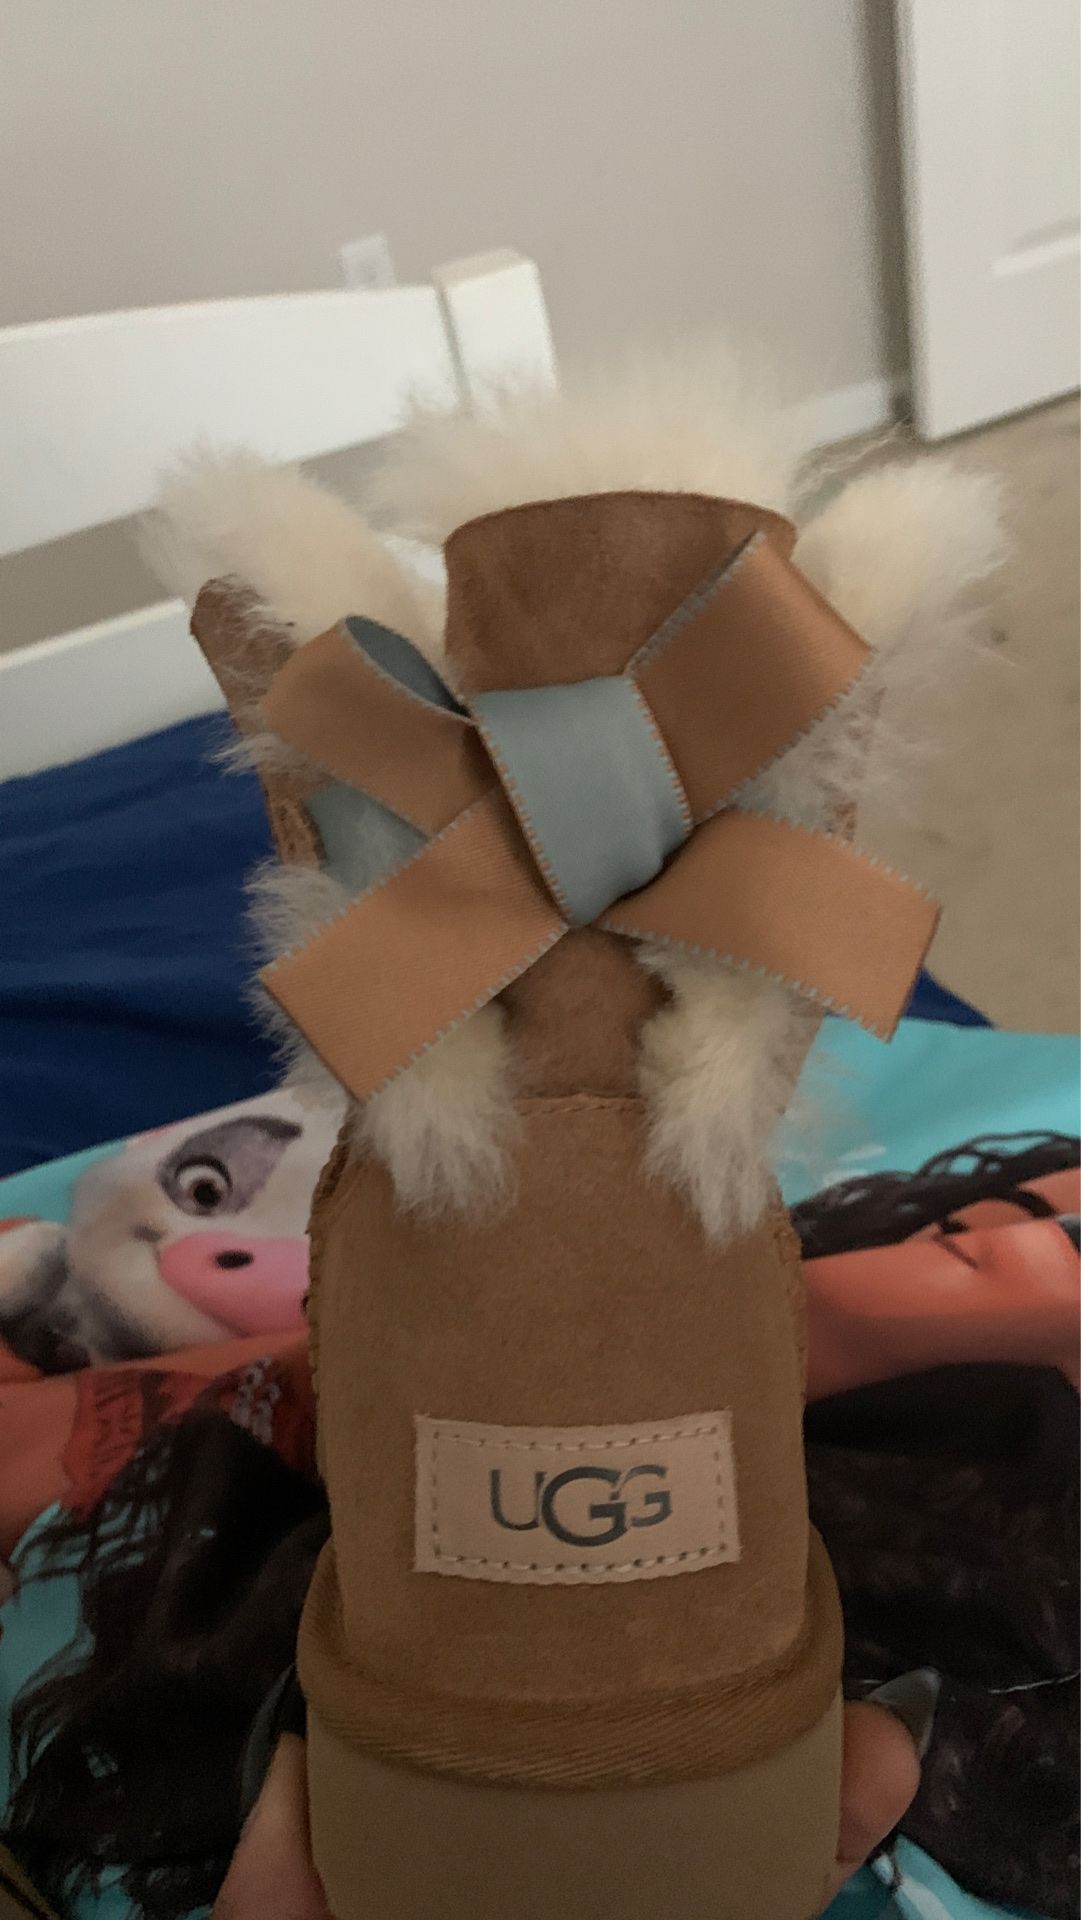 Uggs size 8 brand new